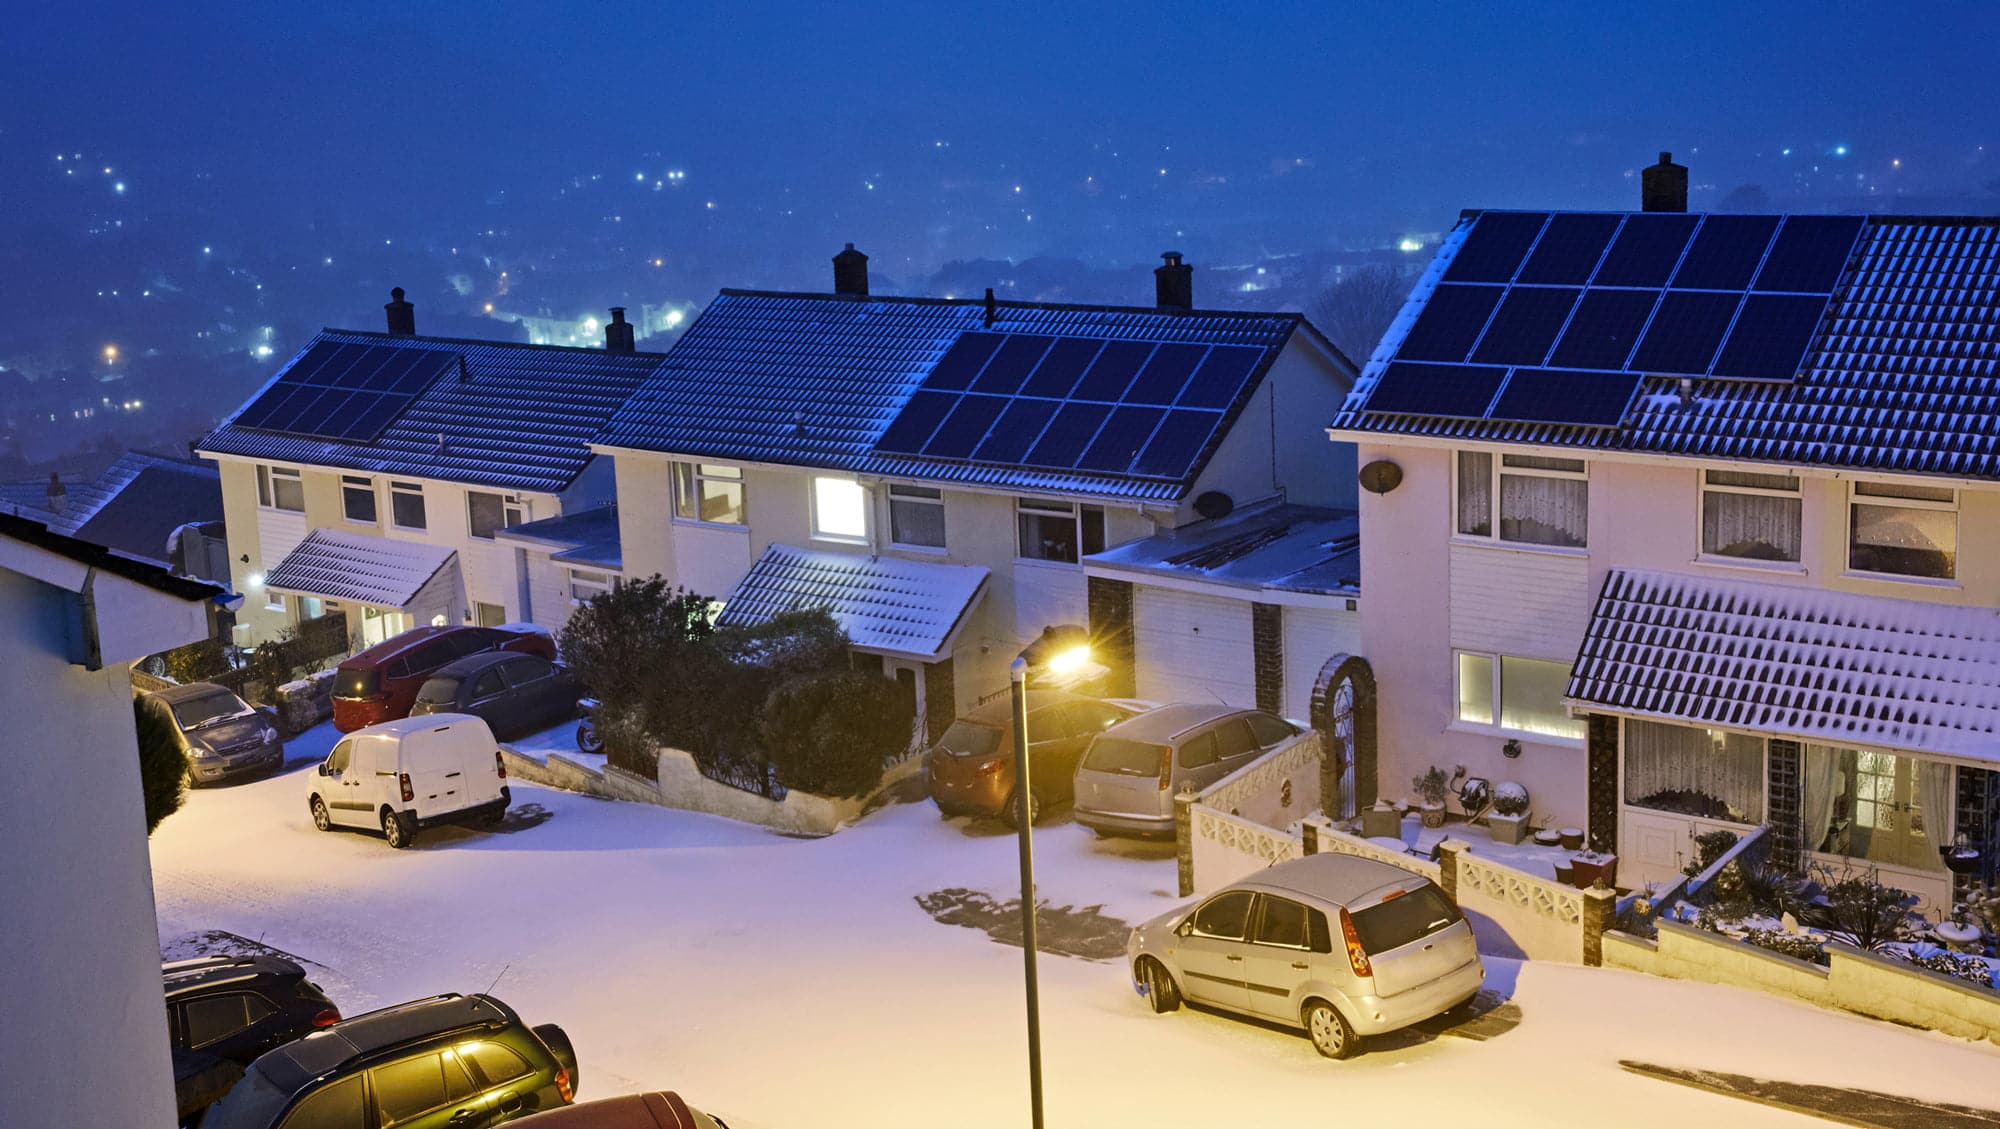 Solar-Panels-On-The-Roofs-Of-The-Houses